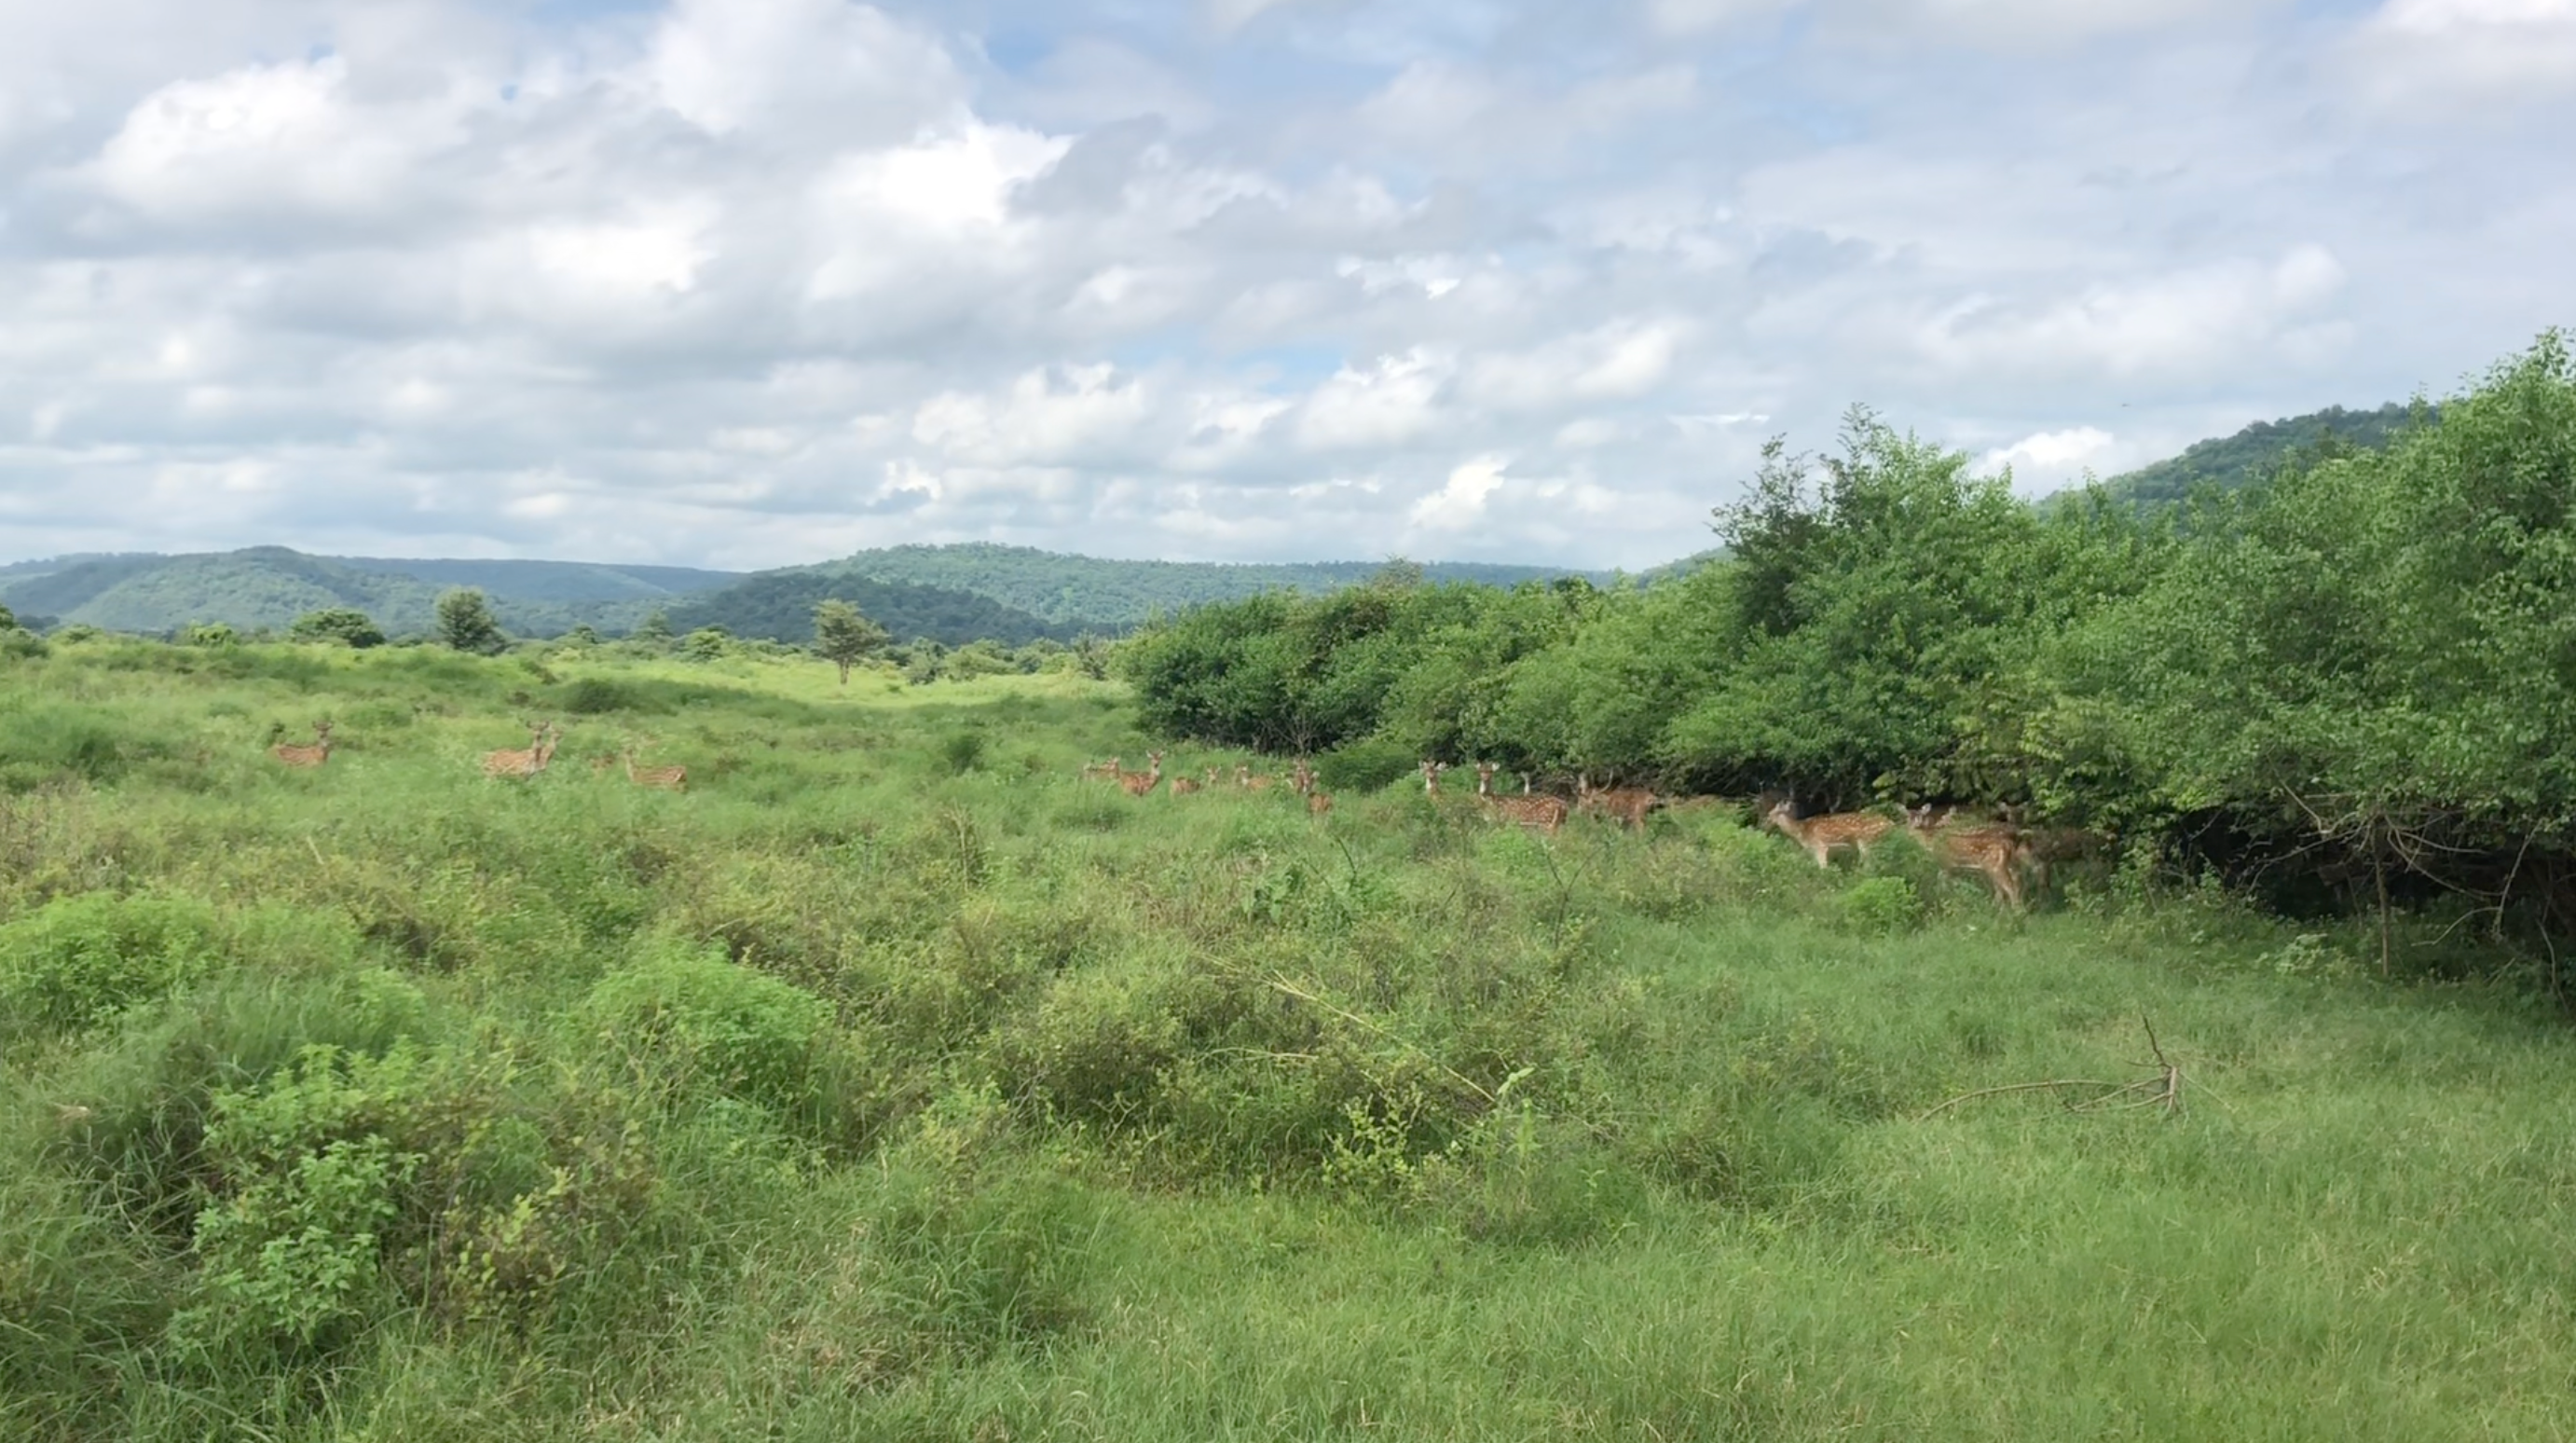 Spotted deers graze and roam about in the lush Kuno national park in India. The animal will largely constitute as the prey base for cheetahs and compete with other animals in these grasslands.